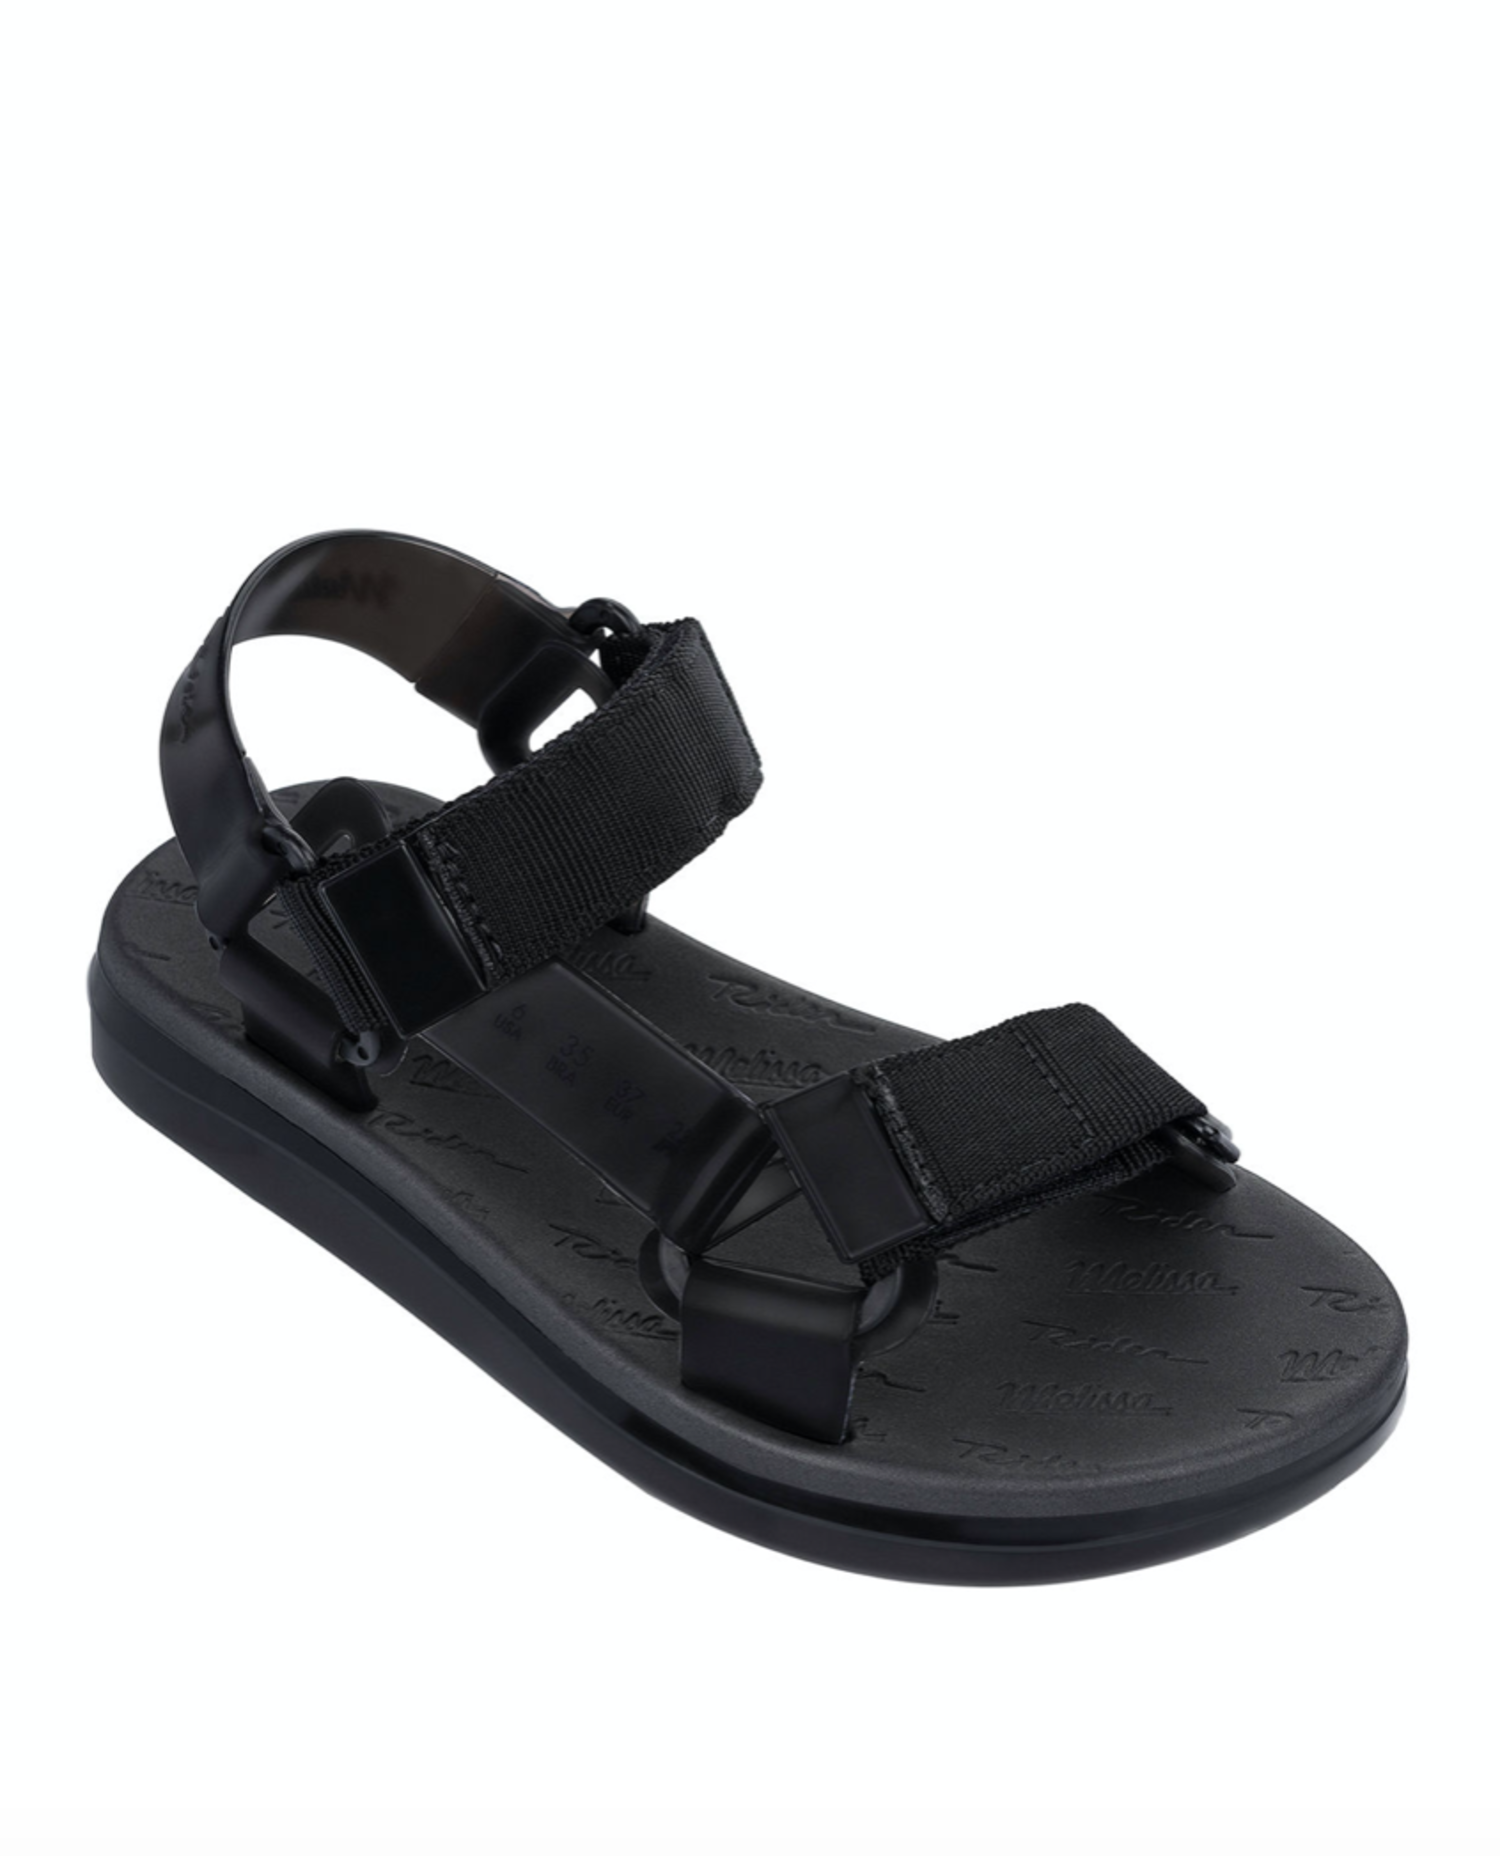 Rider Sandal in Black by Melissa 